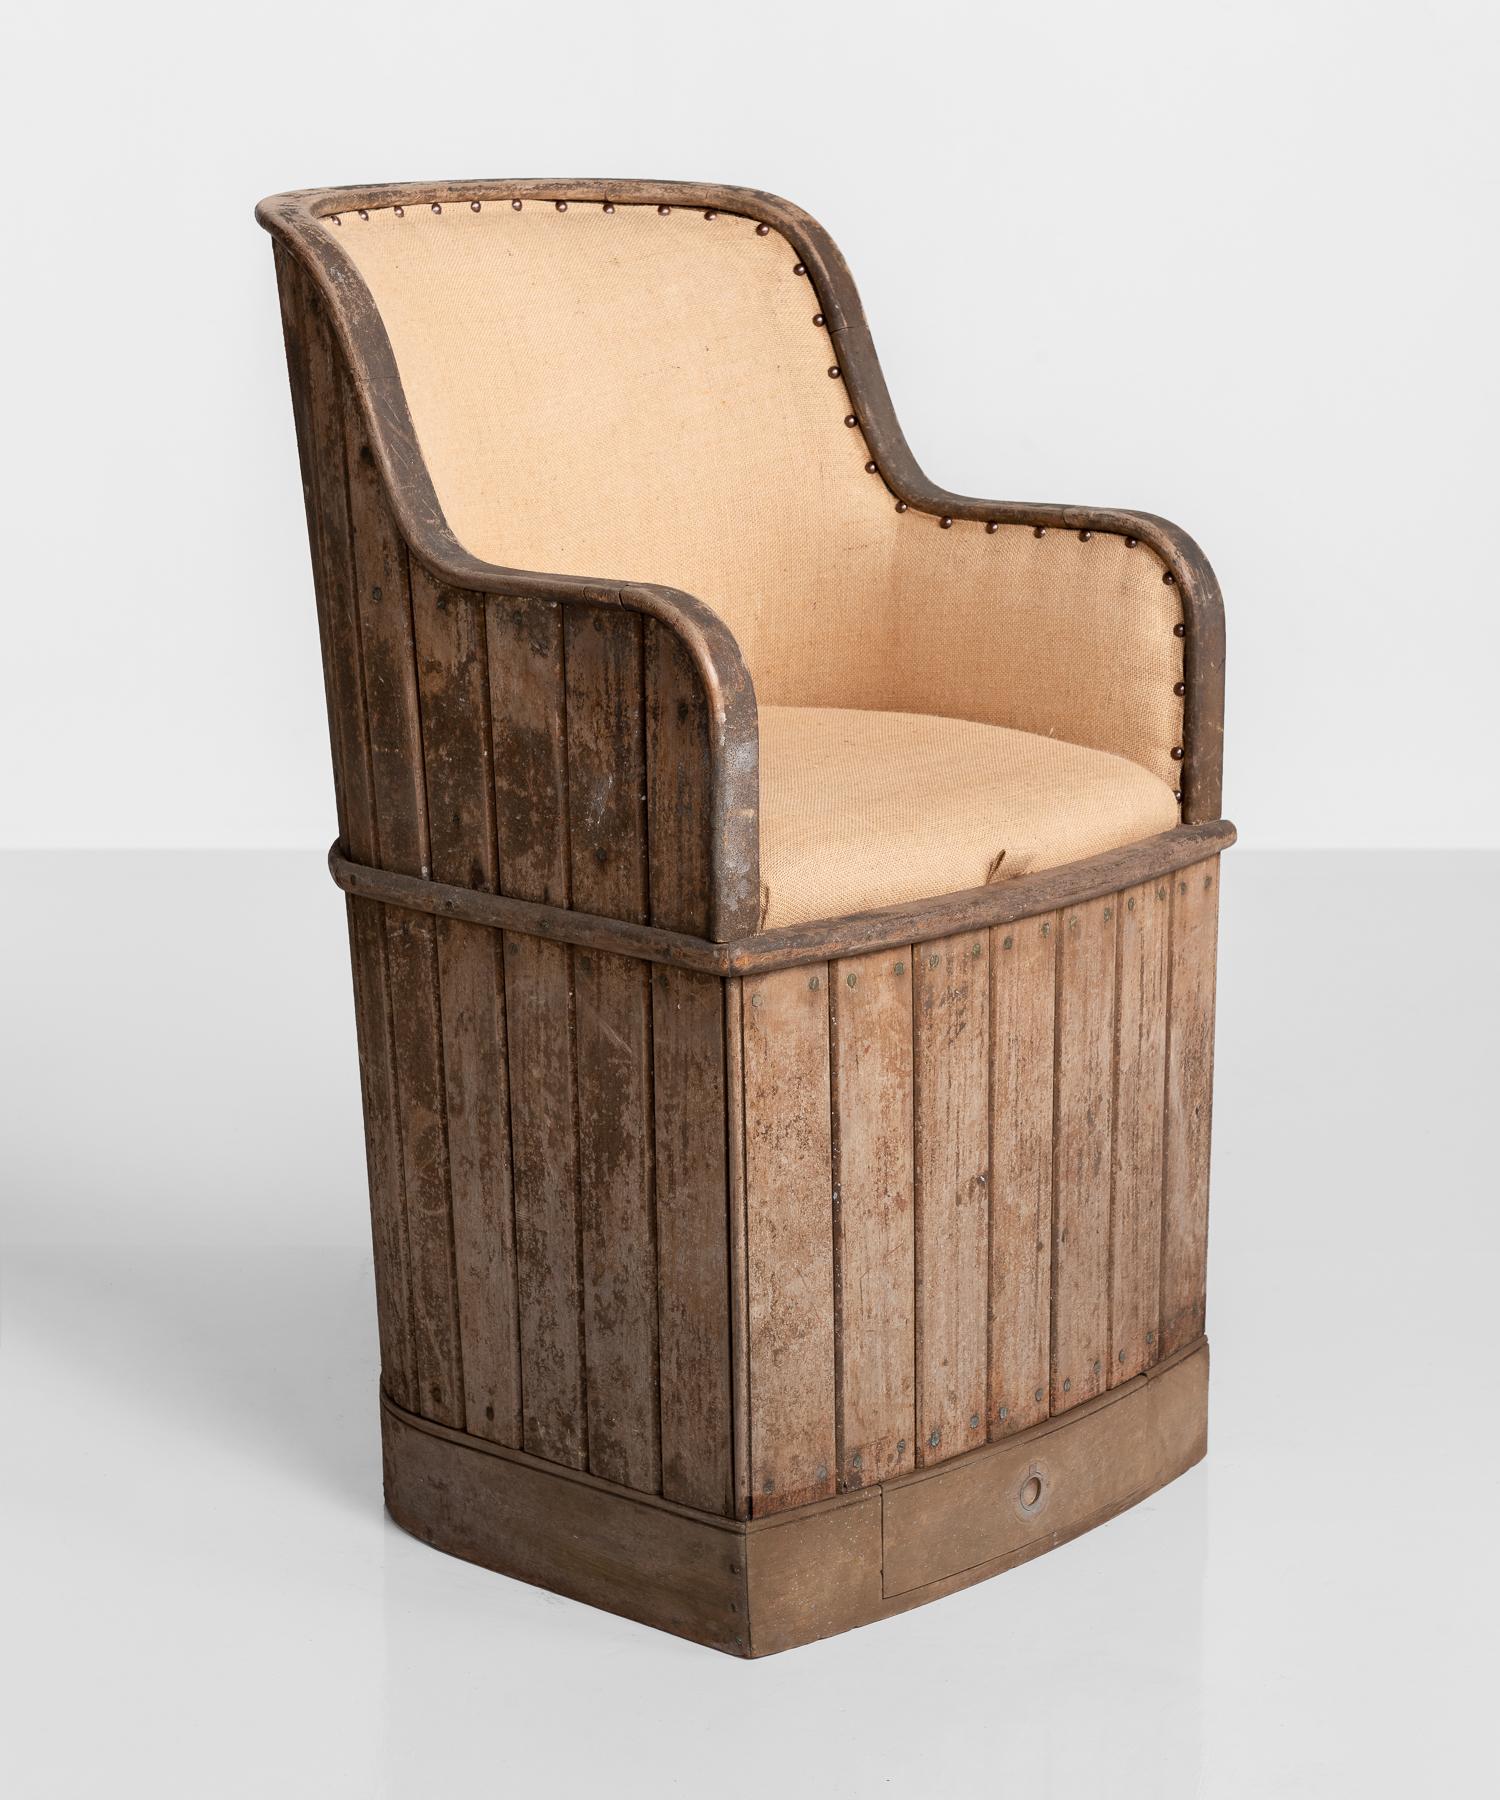 Teak ships armchair, England, circa 1880.

Slatted teak construction with brass screws, newly upholstered in linen. Seat lifts off to reveal a large storage area underneath.